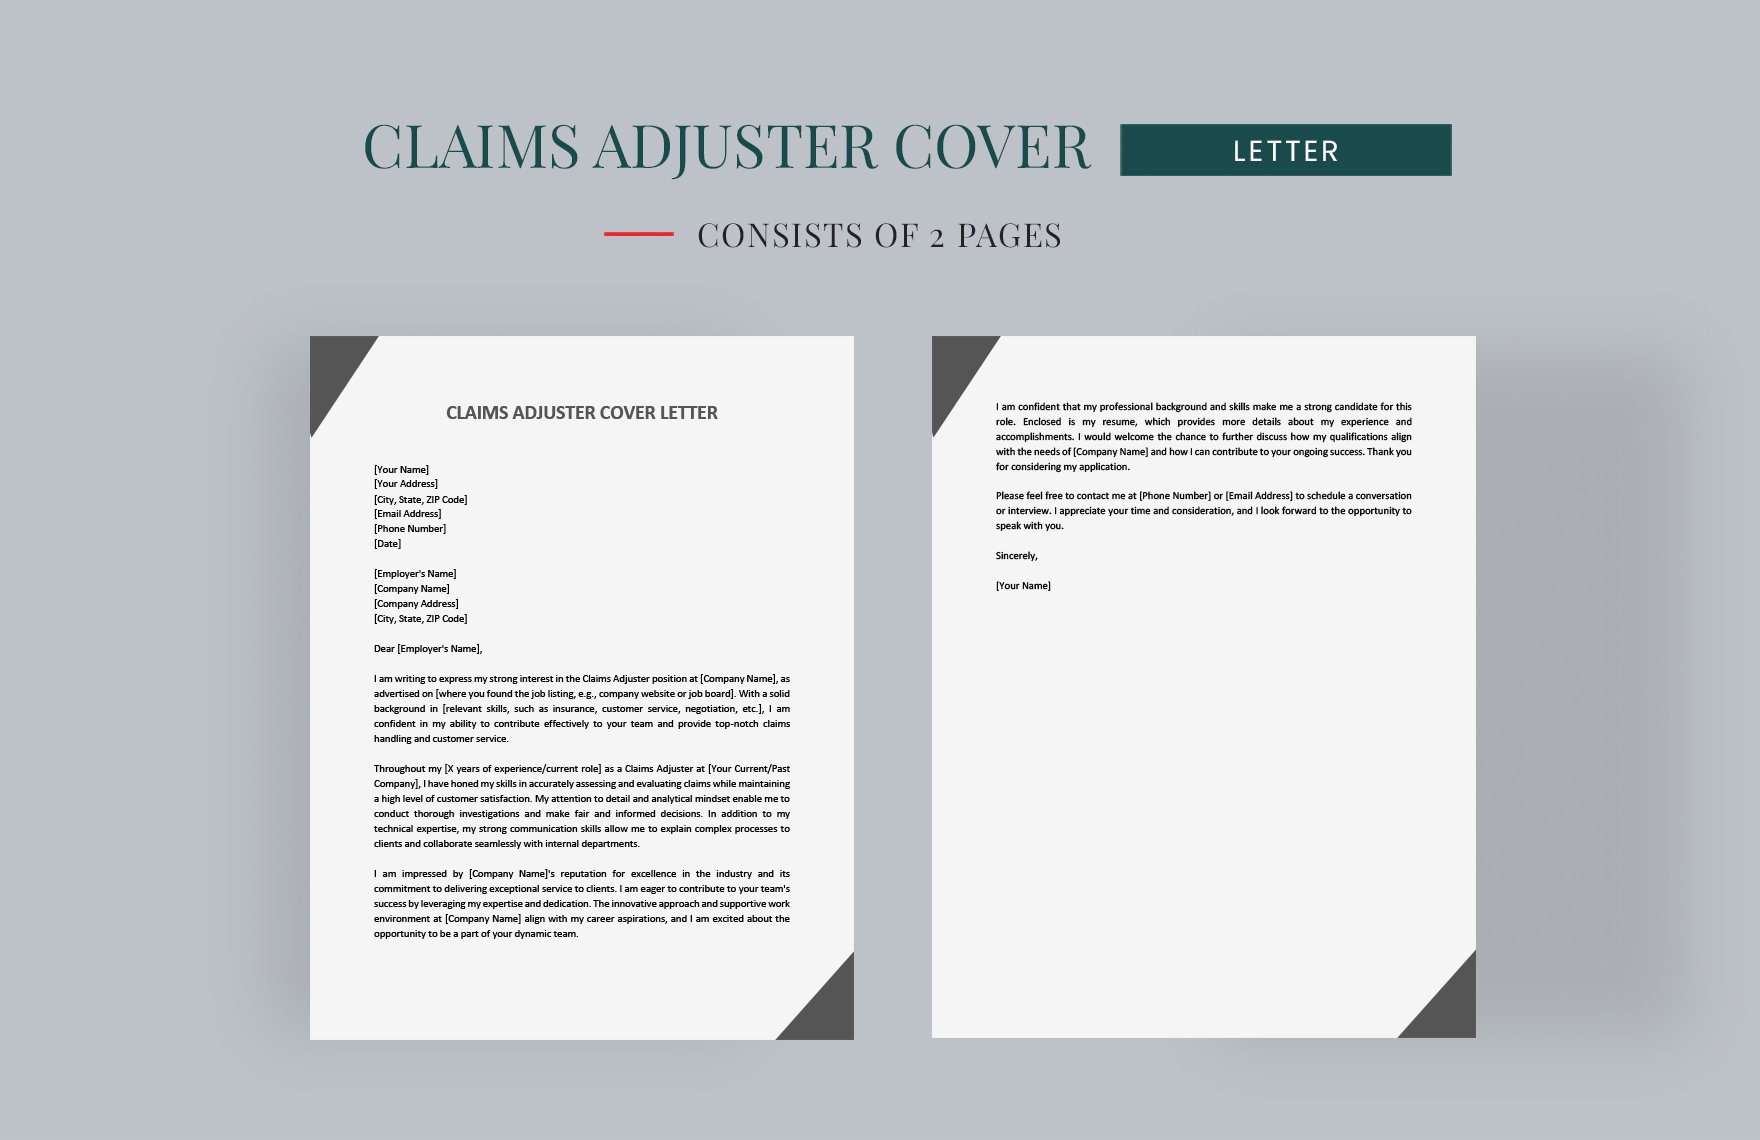 Claims Adjuster Cover Letter in Word, Google Docs, PDF